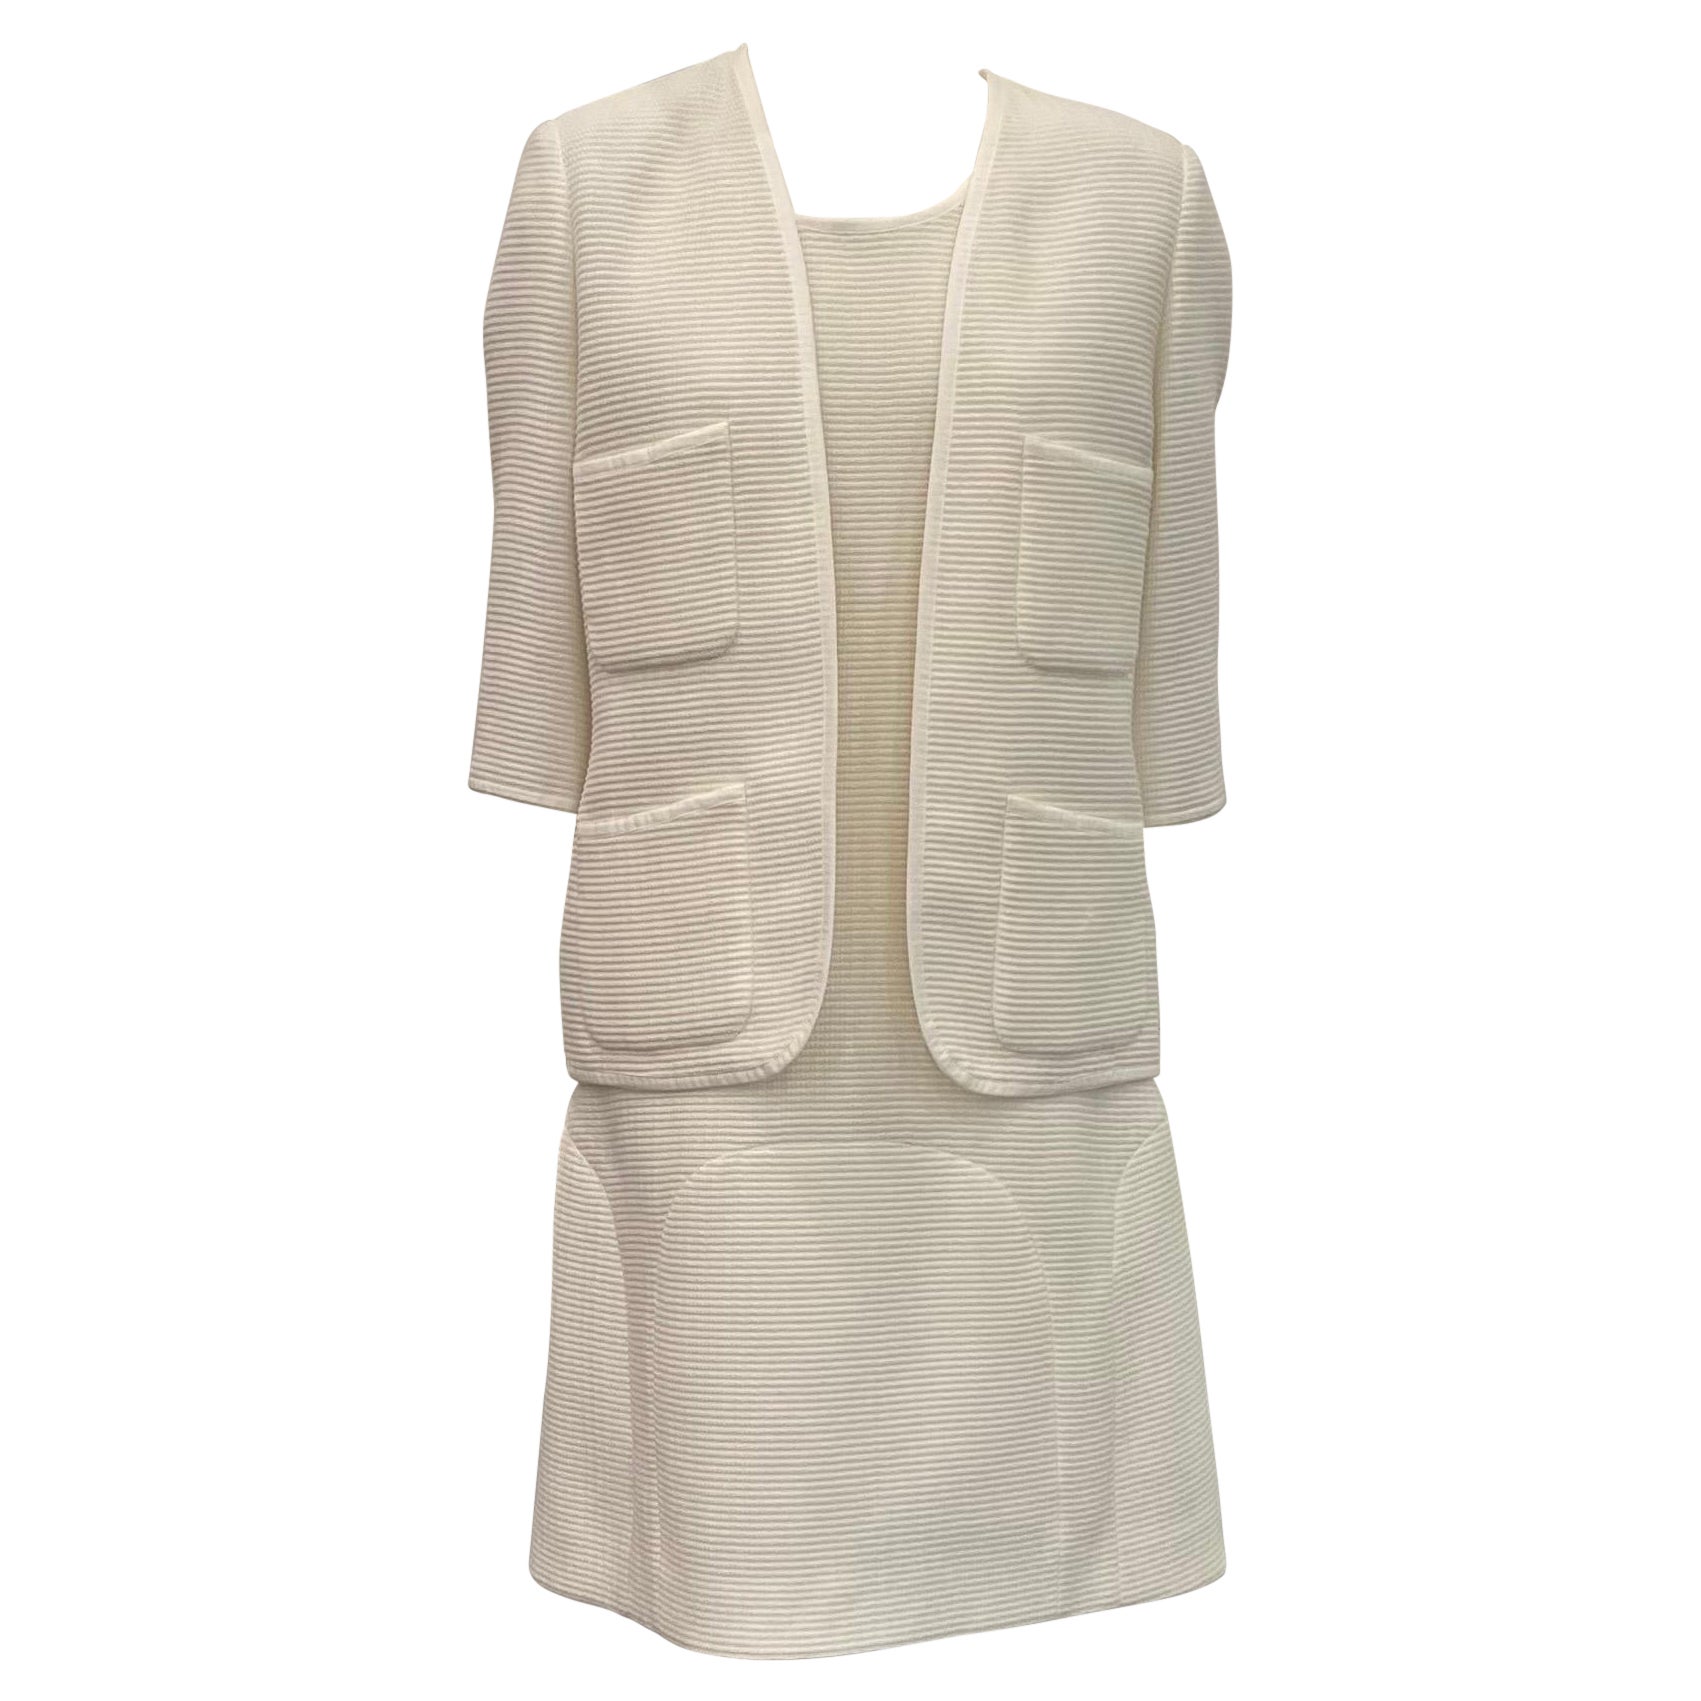 Chanel Ivory Ribbed Cotton Sleeveless Shift Dress with Jacket - Sz 42 For Sale